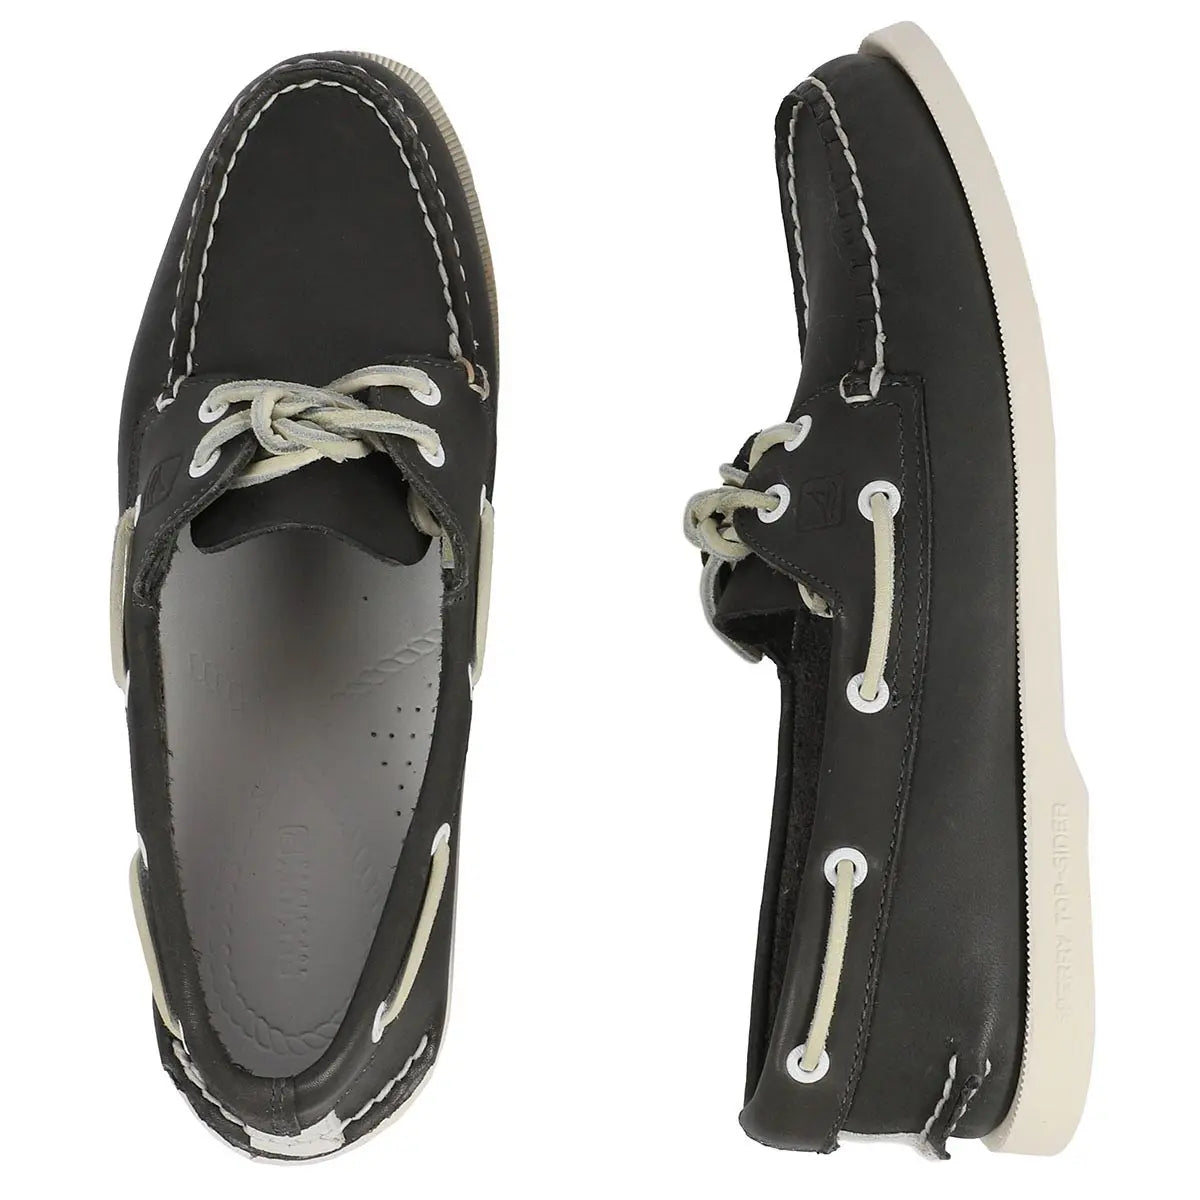 Sperry Women's A/O Boat Shoes